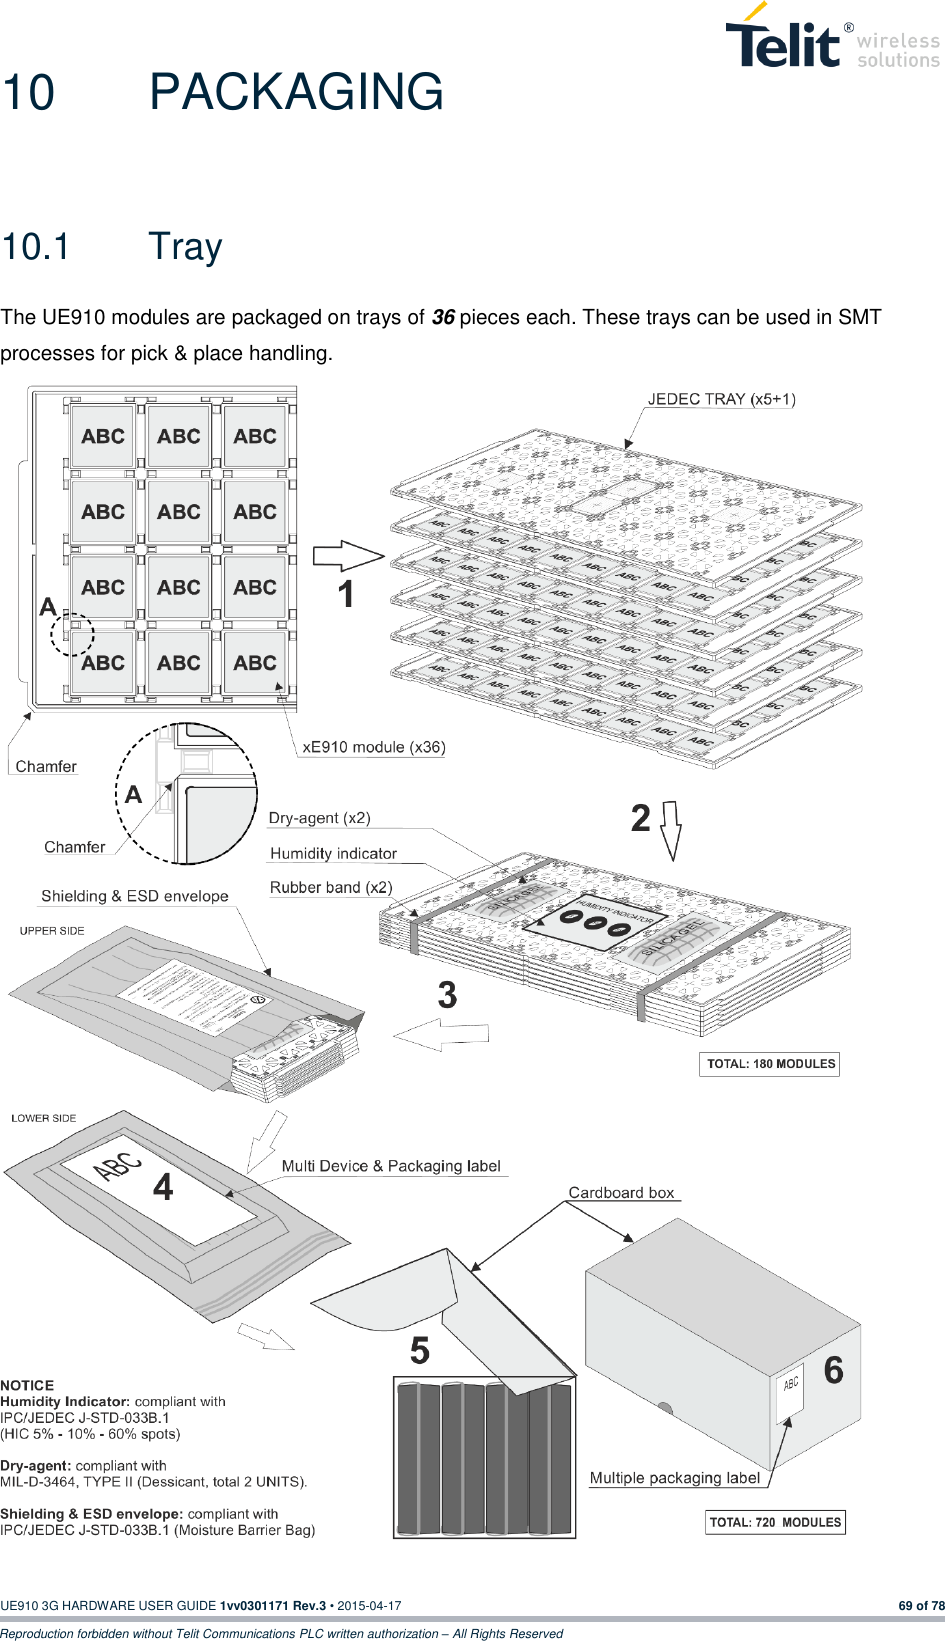  UE910 3G HARDWARE USER GUIDE 1vv0301171 Rev.3 • 2015-04-17 69 of 78 Reproduction forbidden without Telit Communications PLC written authorization – All Rights Reserved 10  PACKAGING 10.1  Tray The UE910 modules are packaged on trays of 36 pieces each. These trays can be used in SMT processes for pick &amp; place handling.     